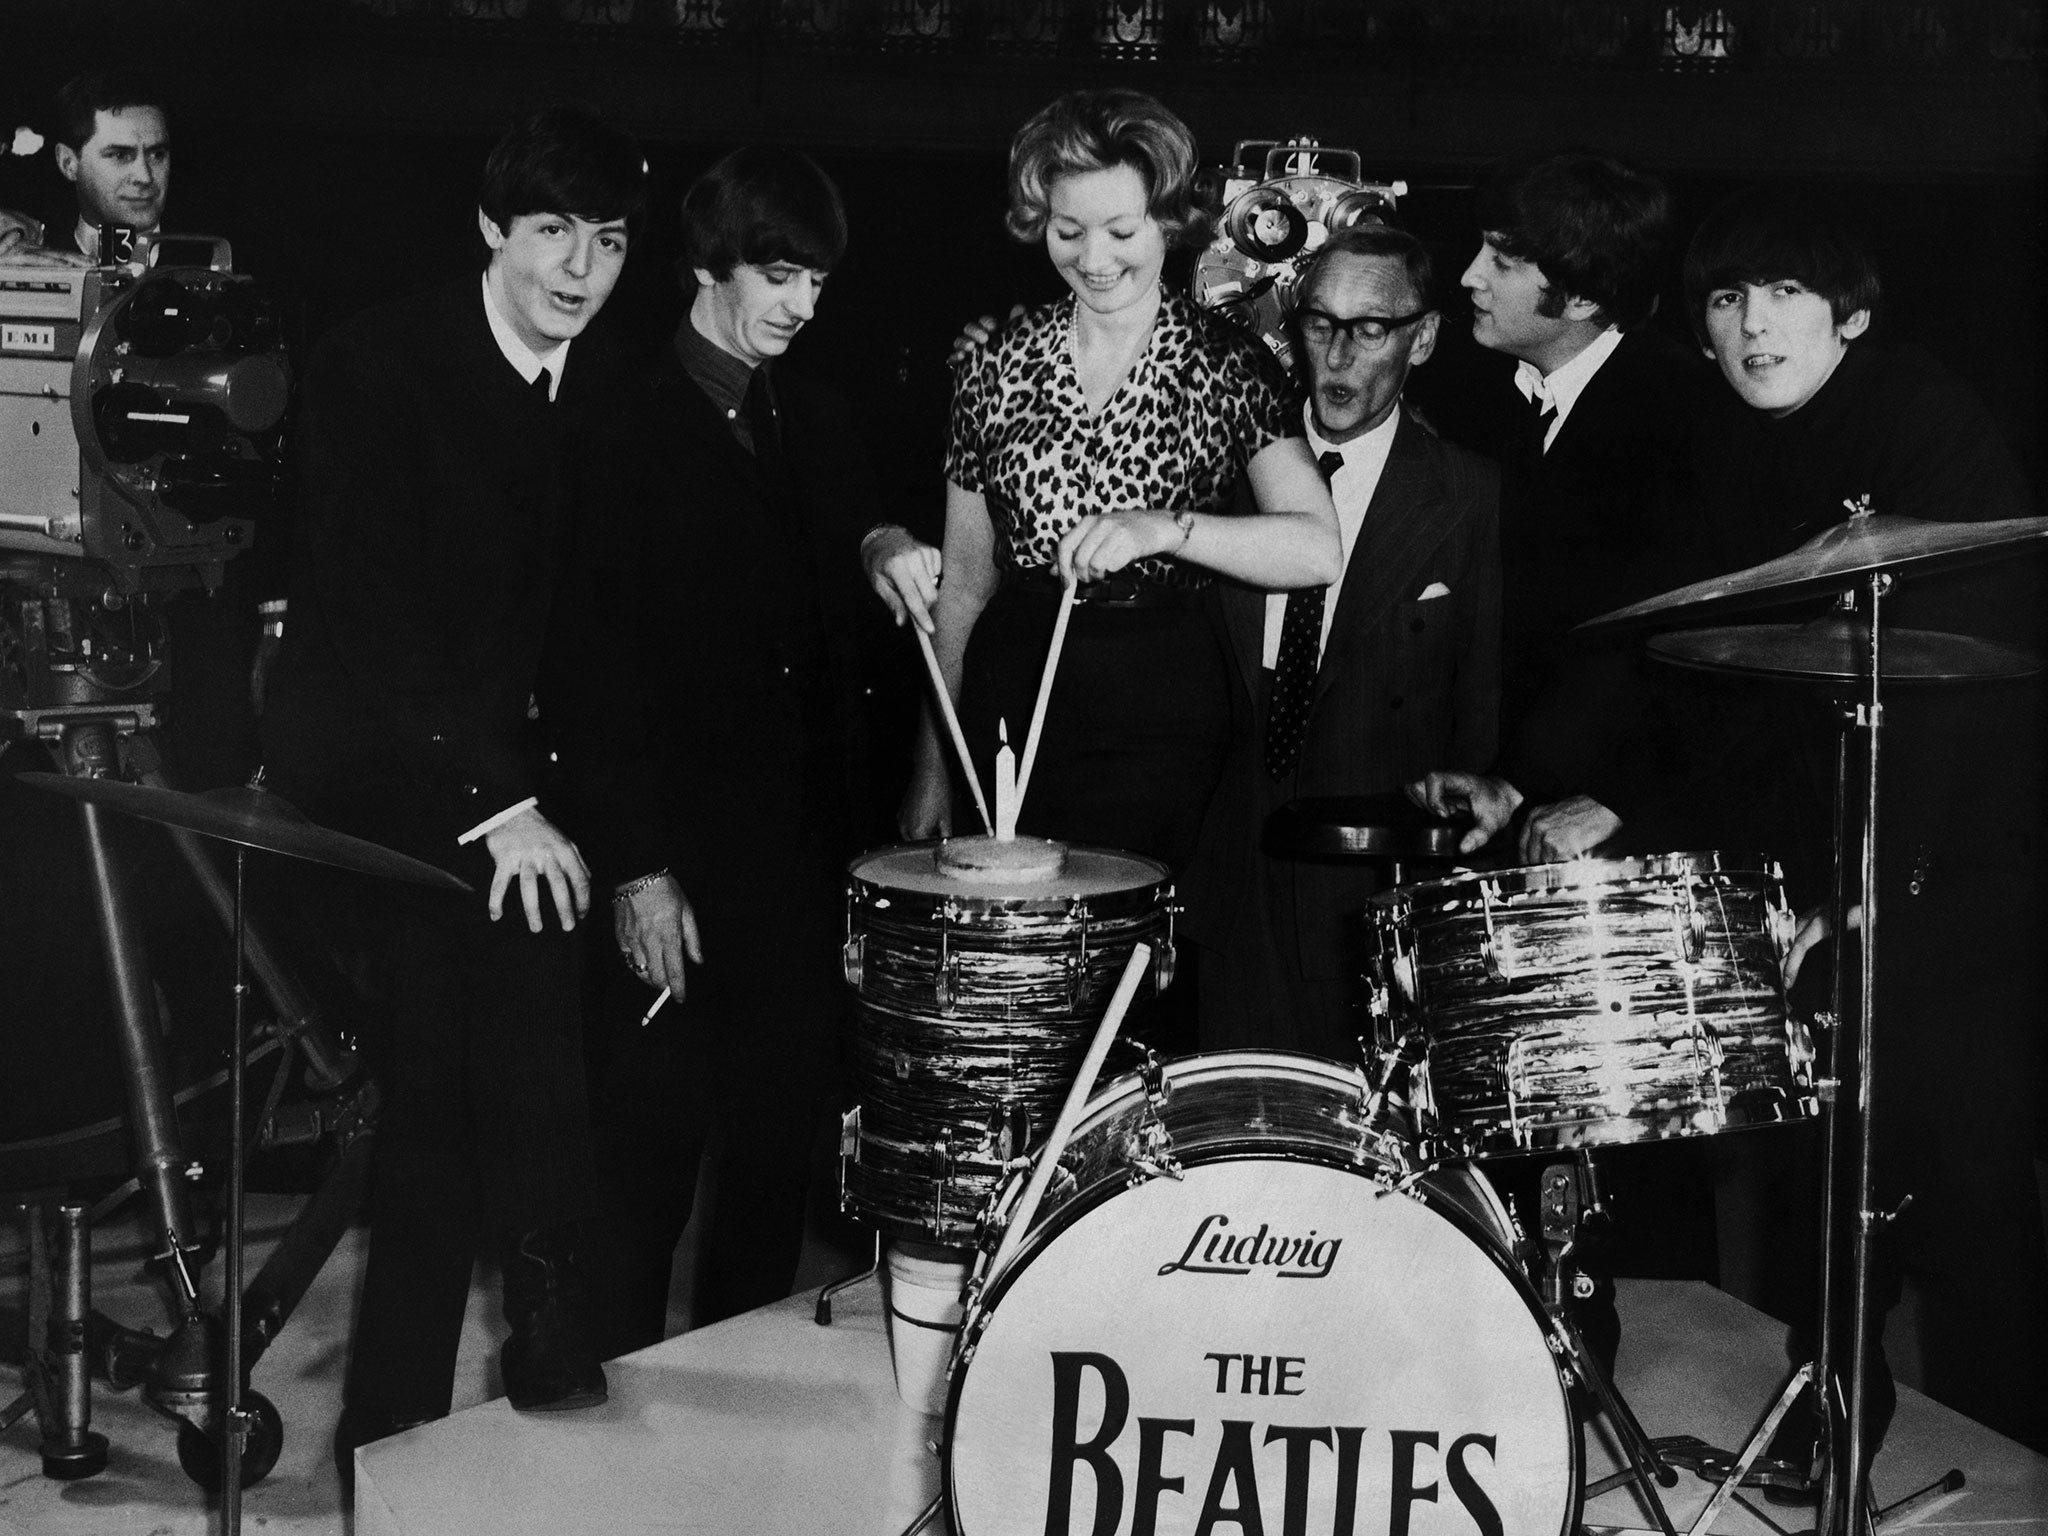 Julie Harris with the Beatles and Wilfrid Brambell, stars of ‘A Hard Day’s Night’ in 1964